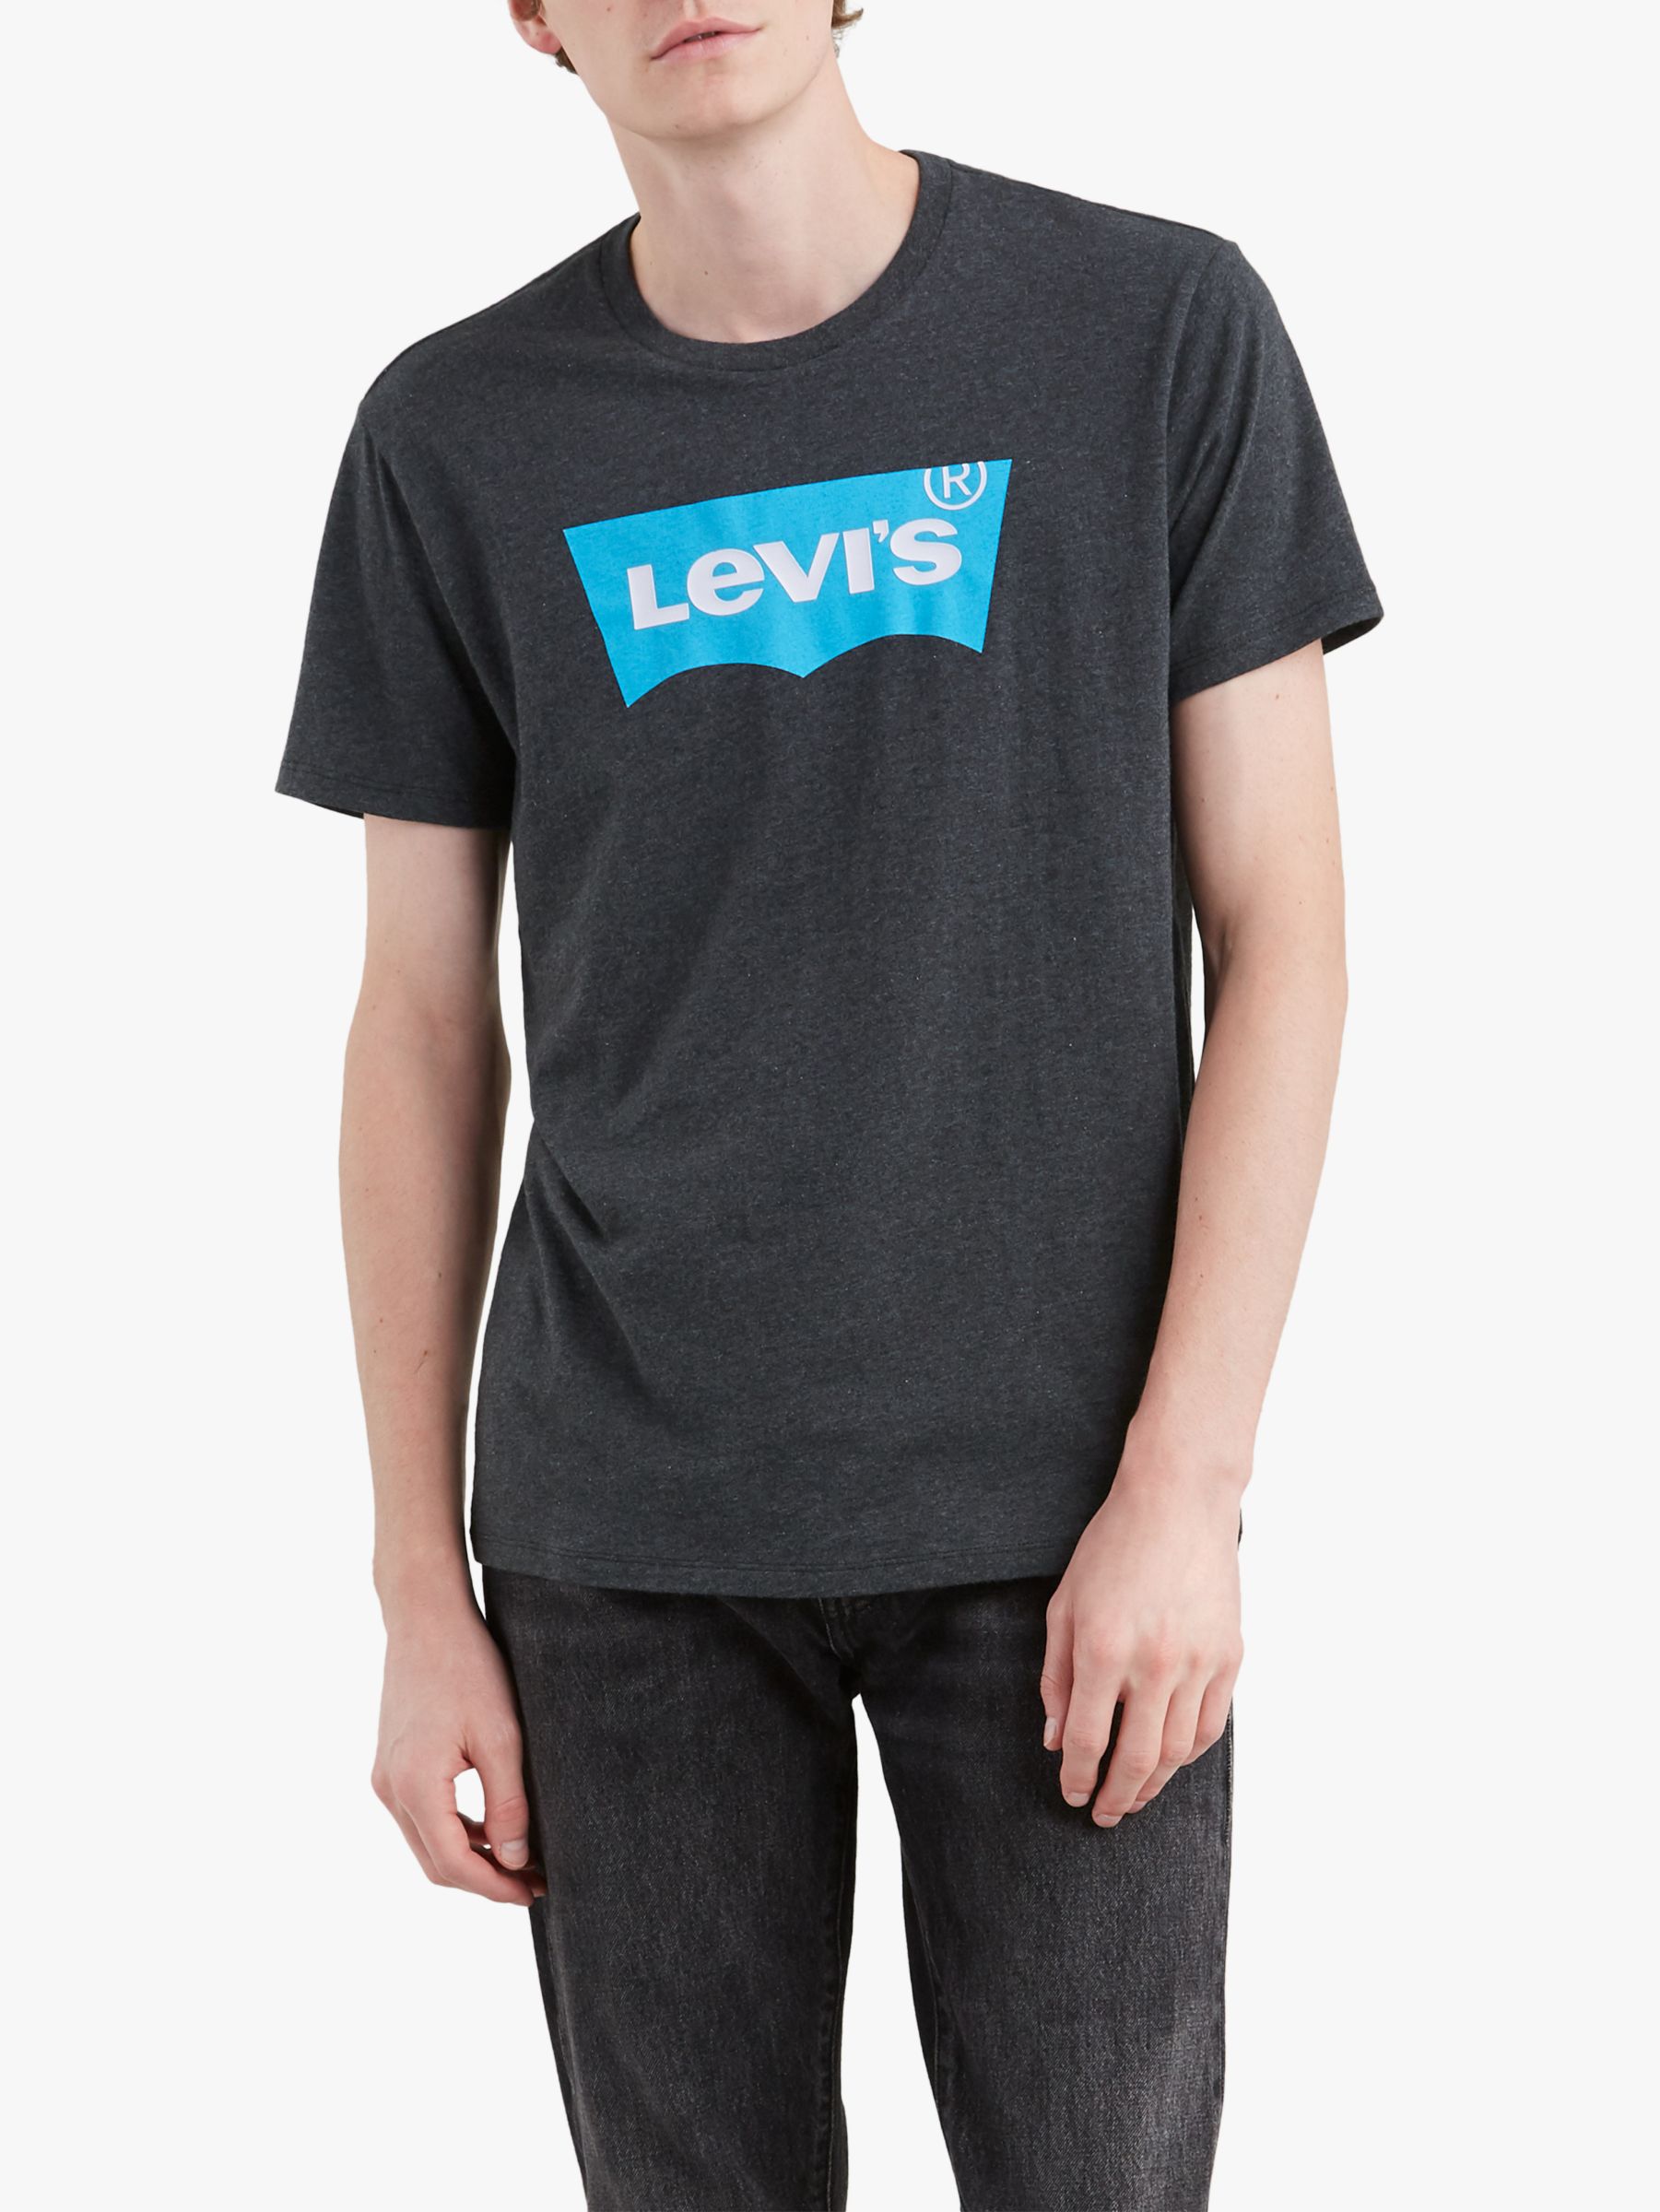 Levi's Short Sleeve Graphic T-Shirt, Charcoal